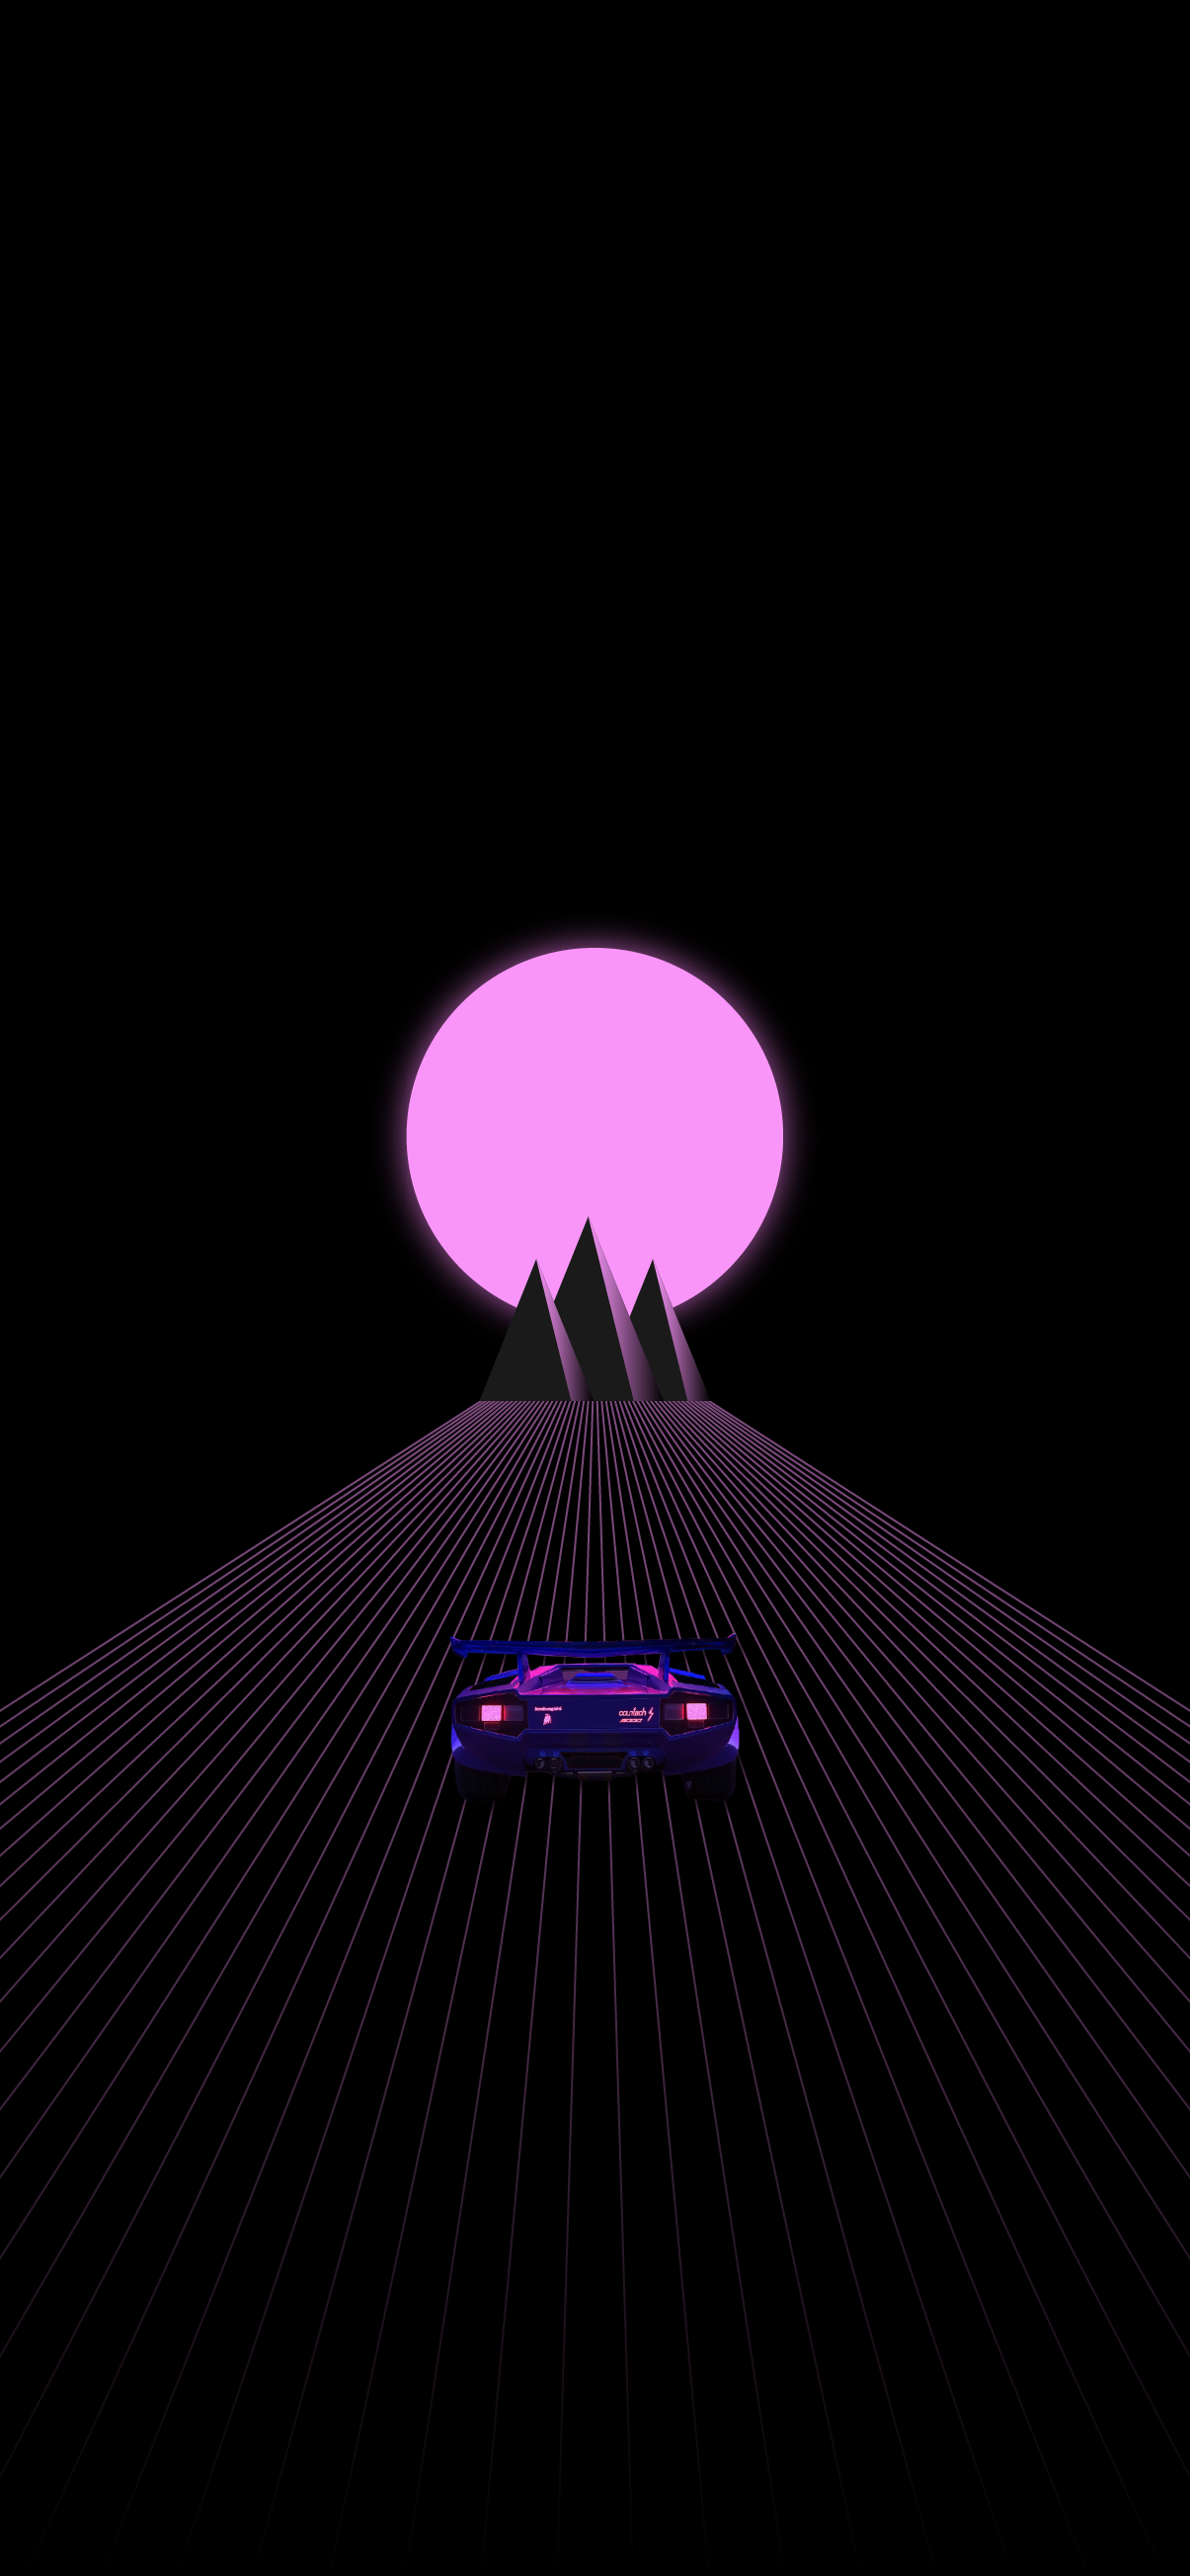 Cool Synthwave Retro Wave Amoled Wallpaper Waves